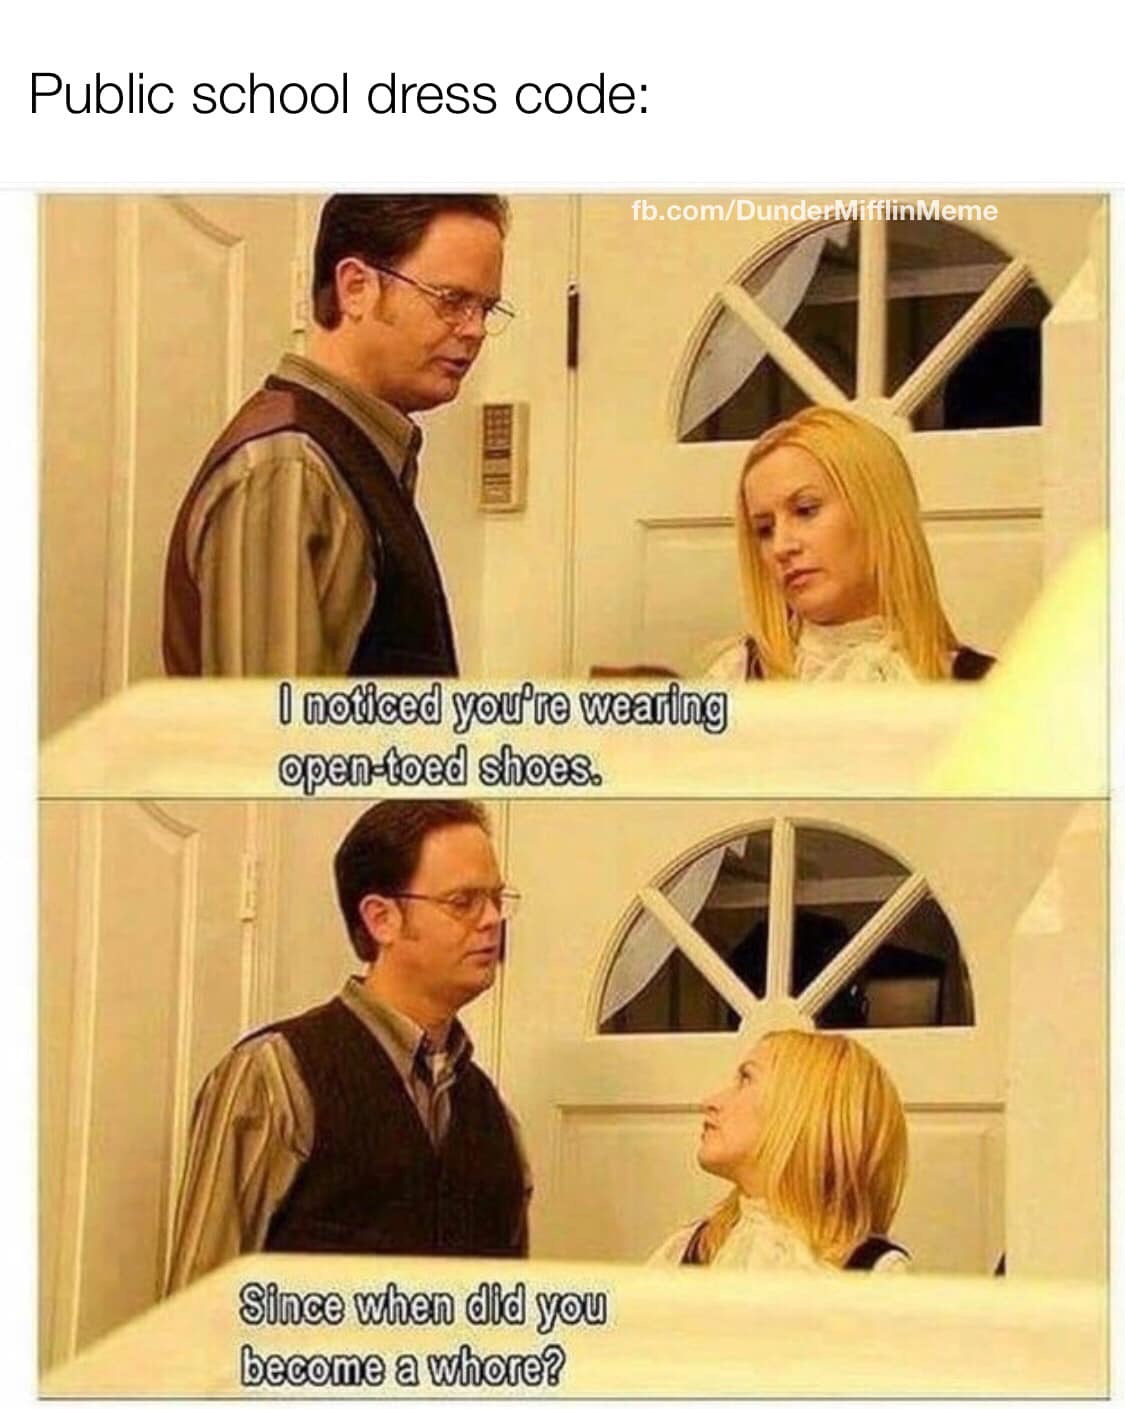 office memes - Public school dress code fb.comDunderMifflin Meme I noticed you're wearing opentoed shoes. Since when did you become a whore?